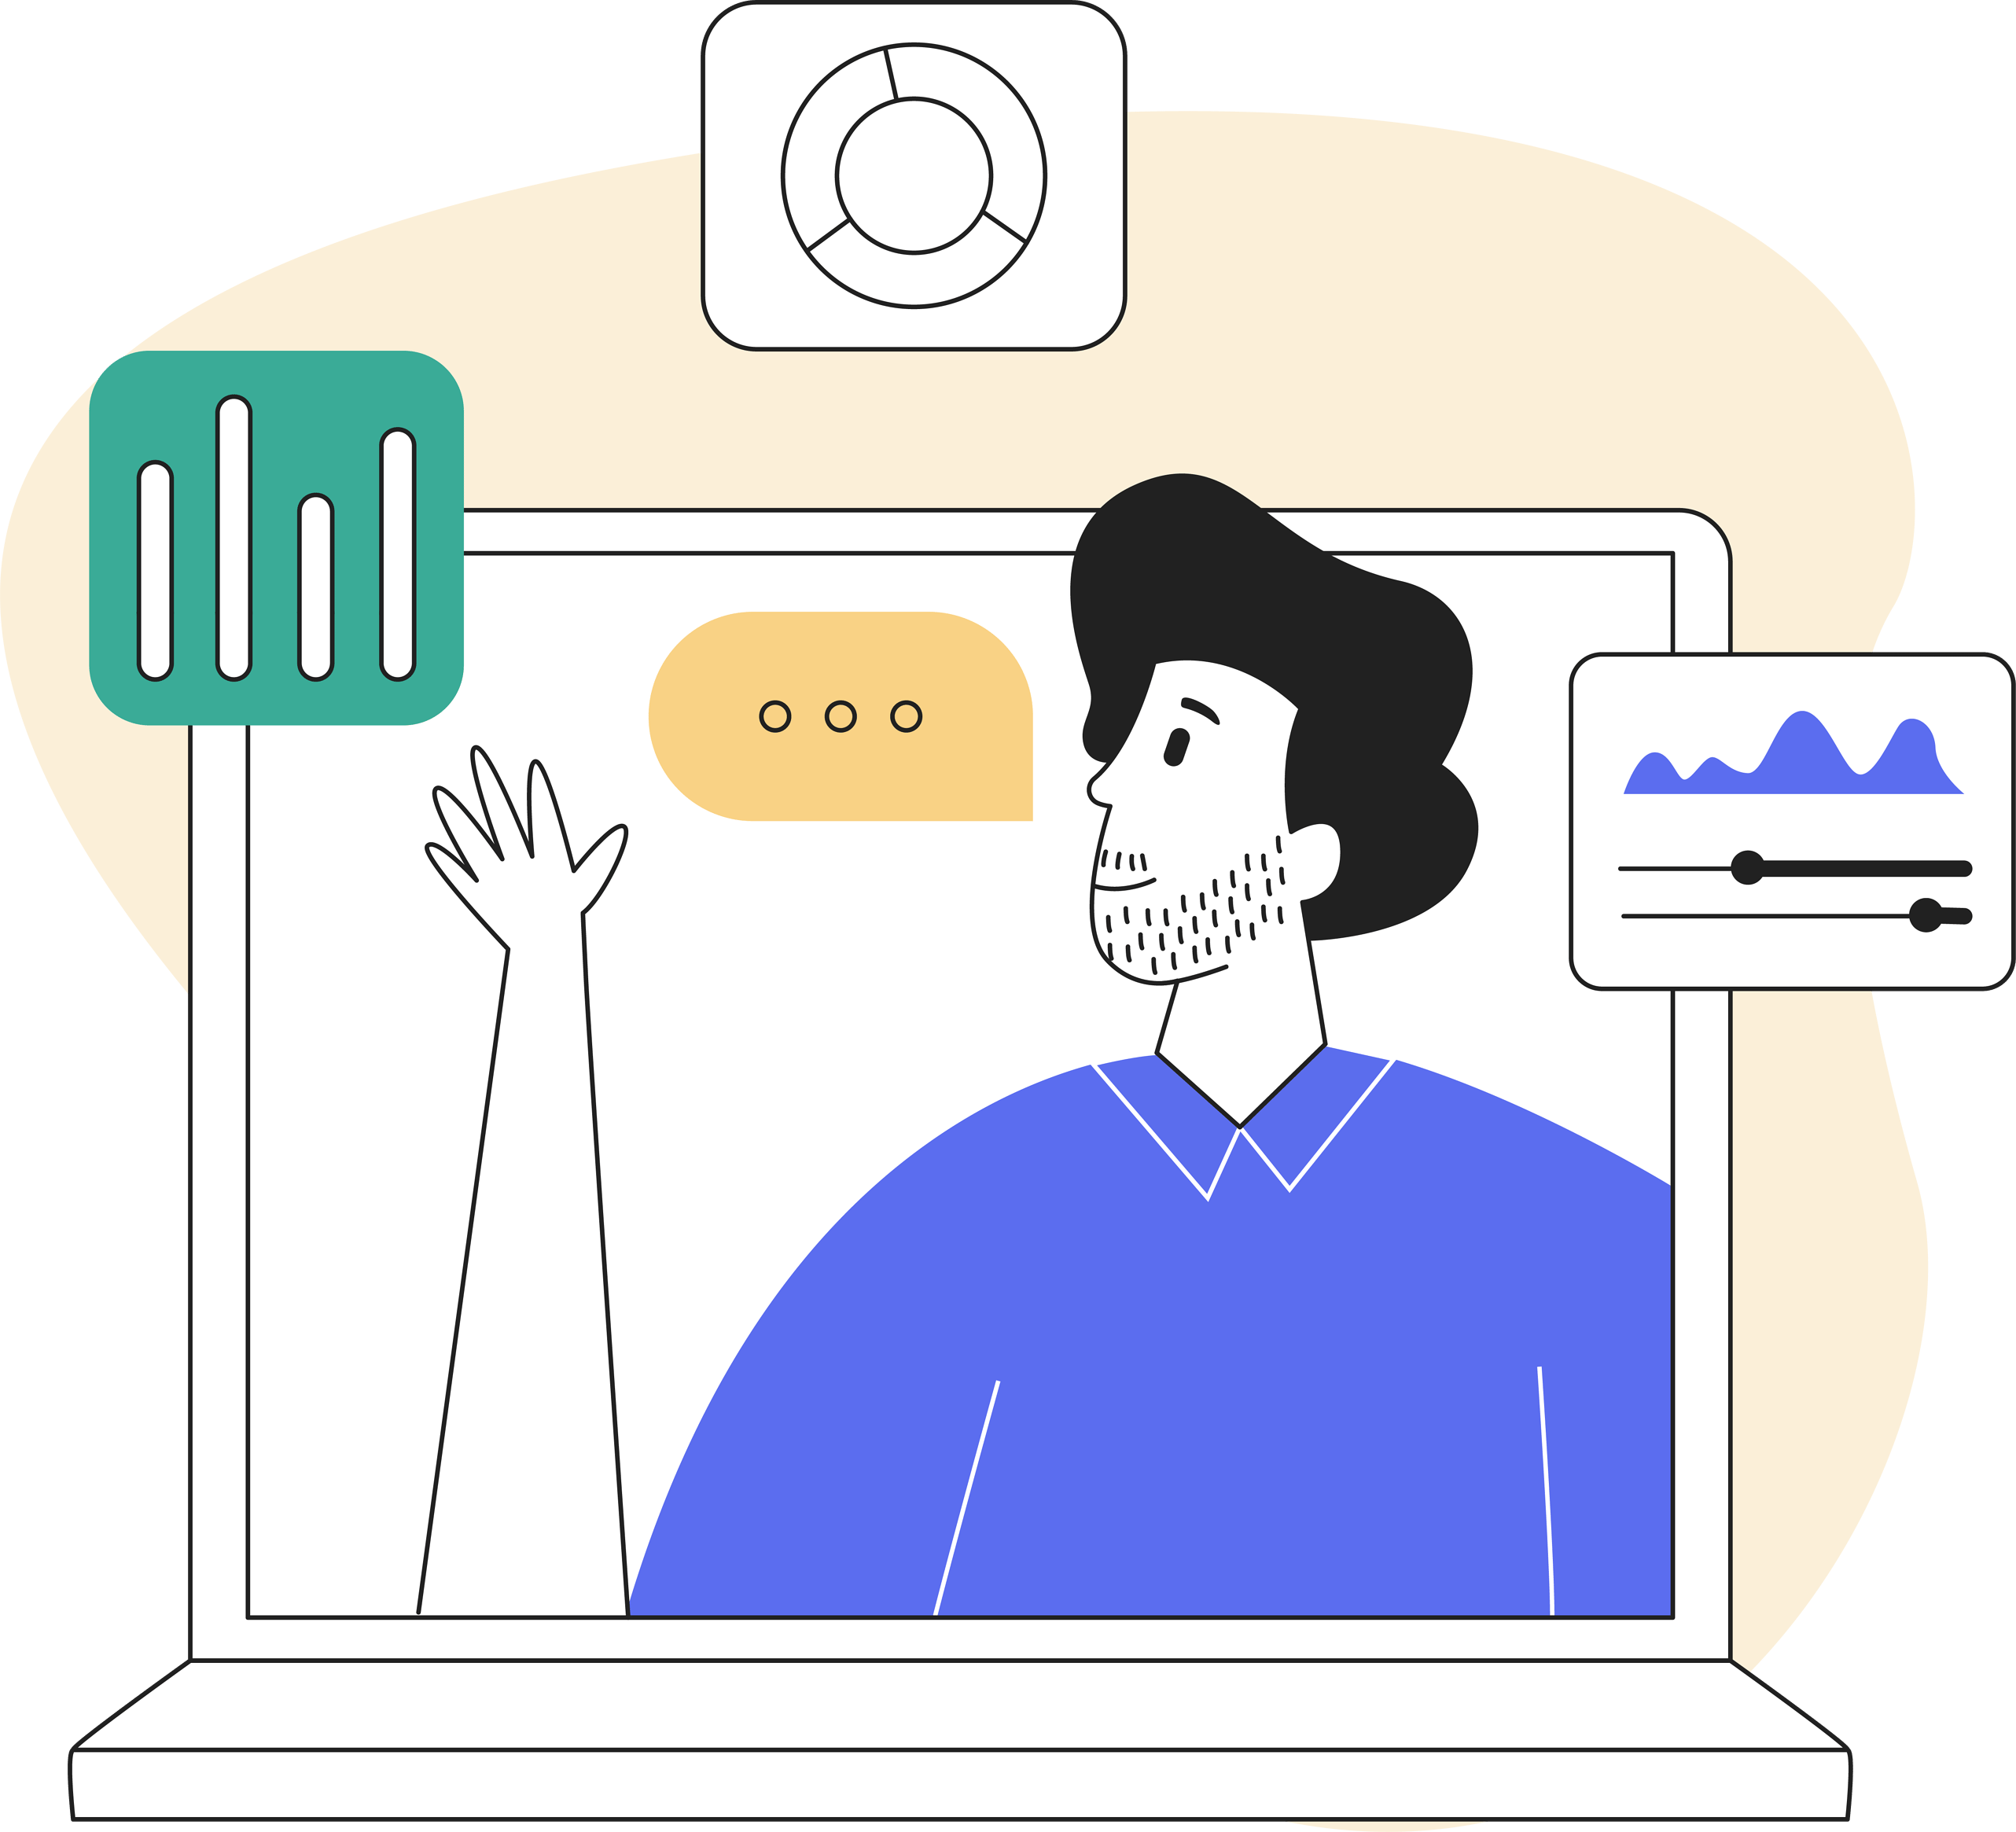 Illustration of a man doing positioning and messaging work